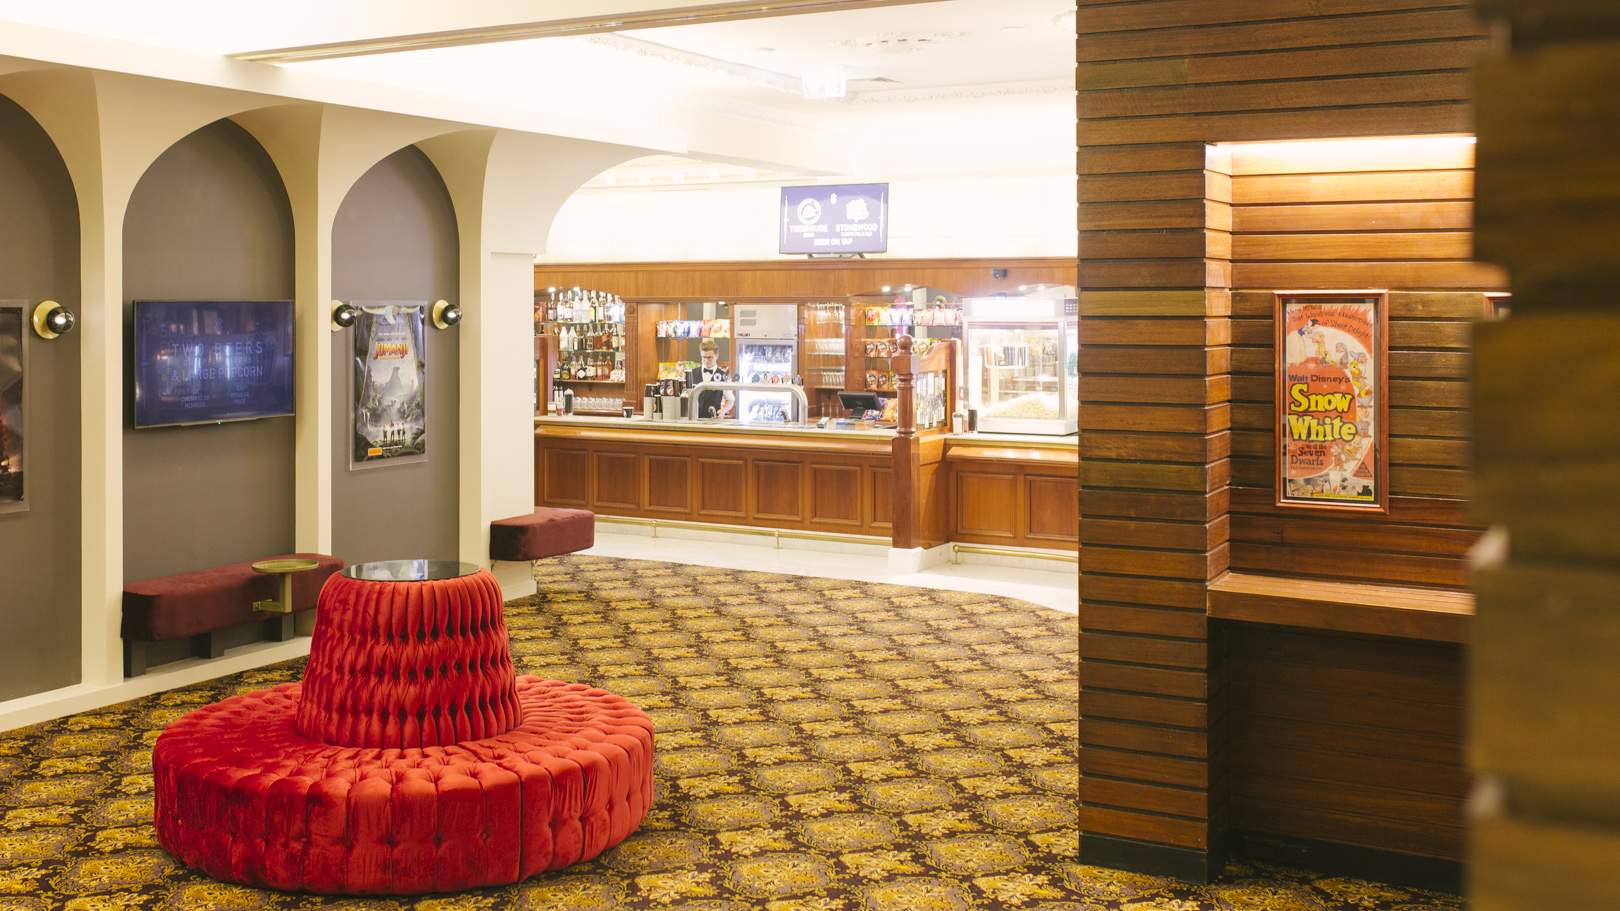 A Look Inside Brisbane's Decadent New Elizabeth Picture Theatre